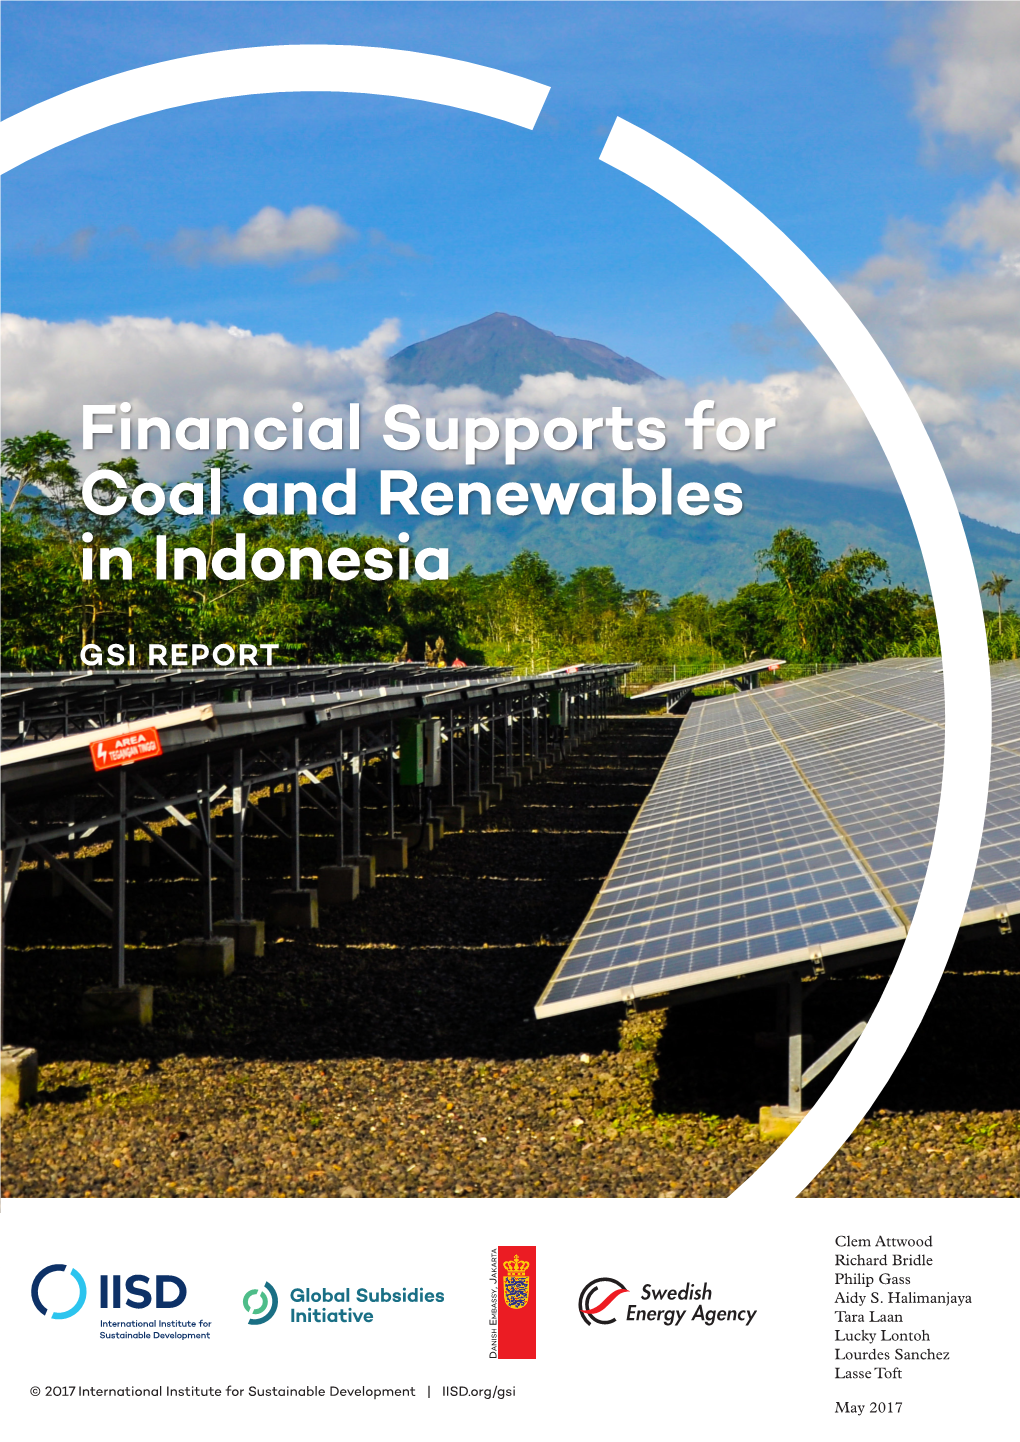 Financial Supports for Coal and Renewables in Indonesia